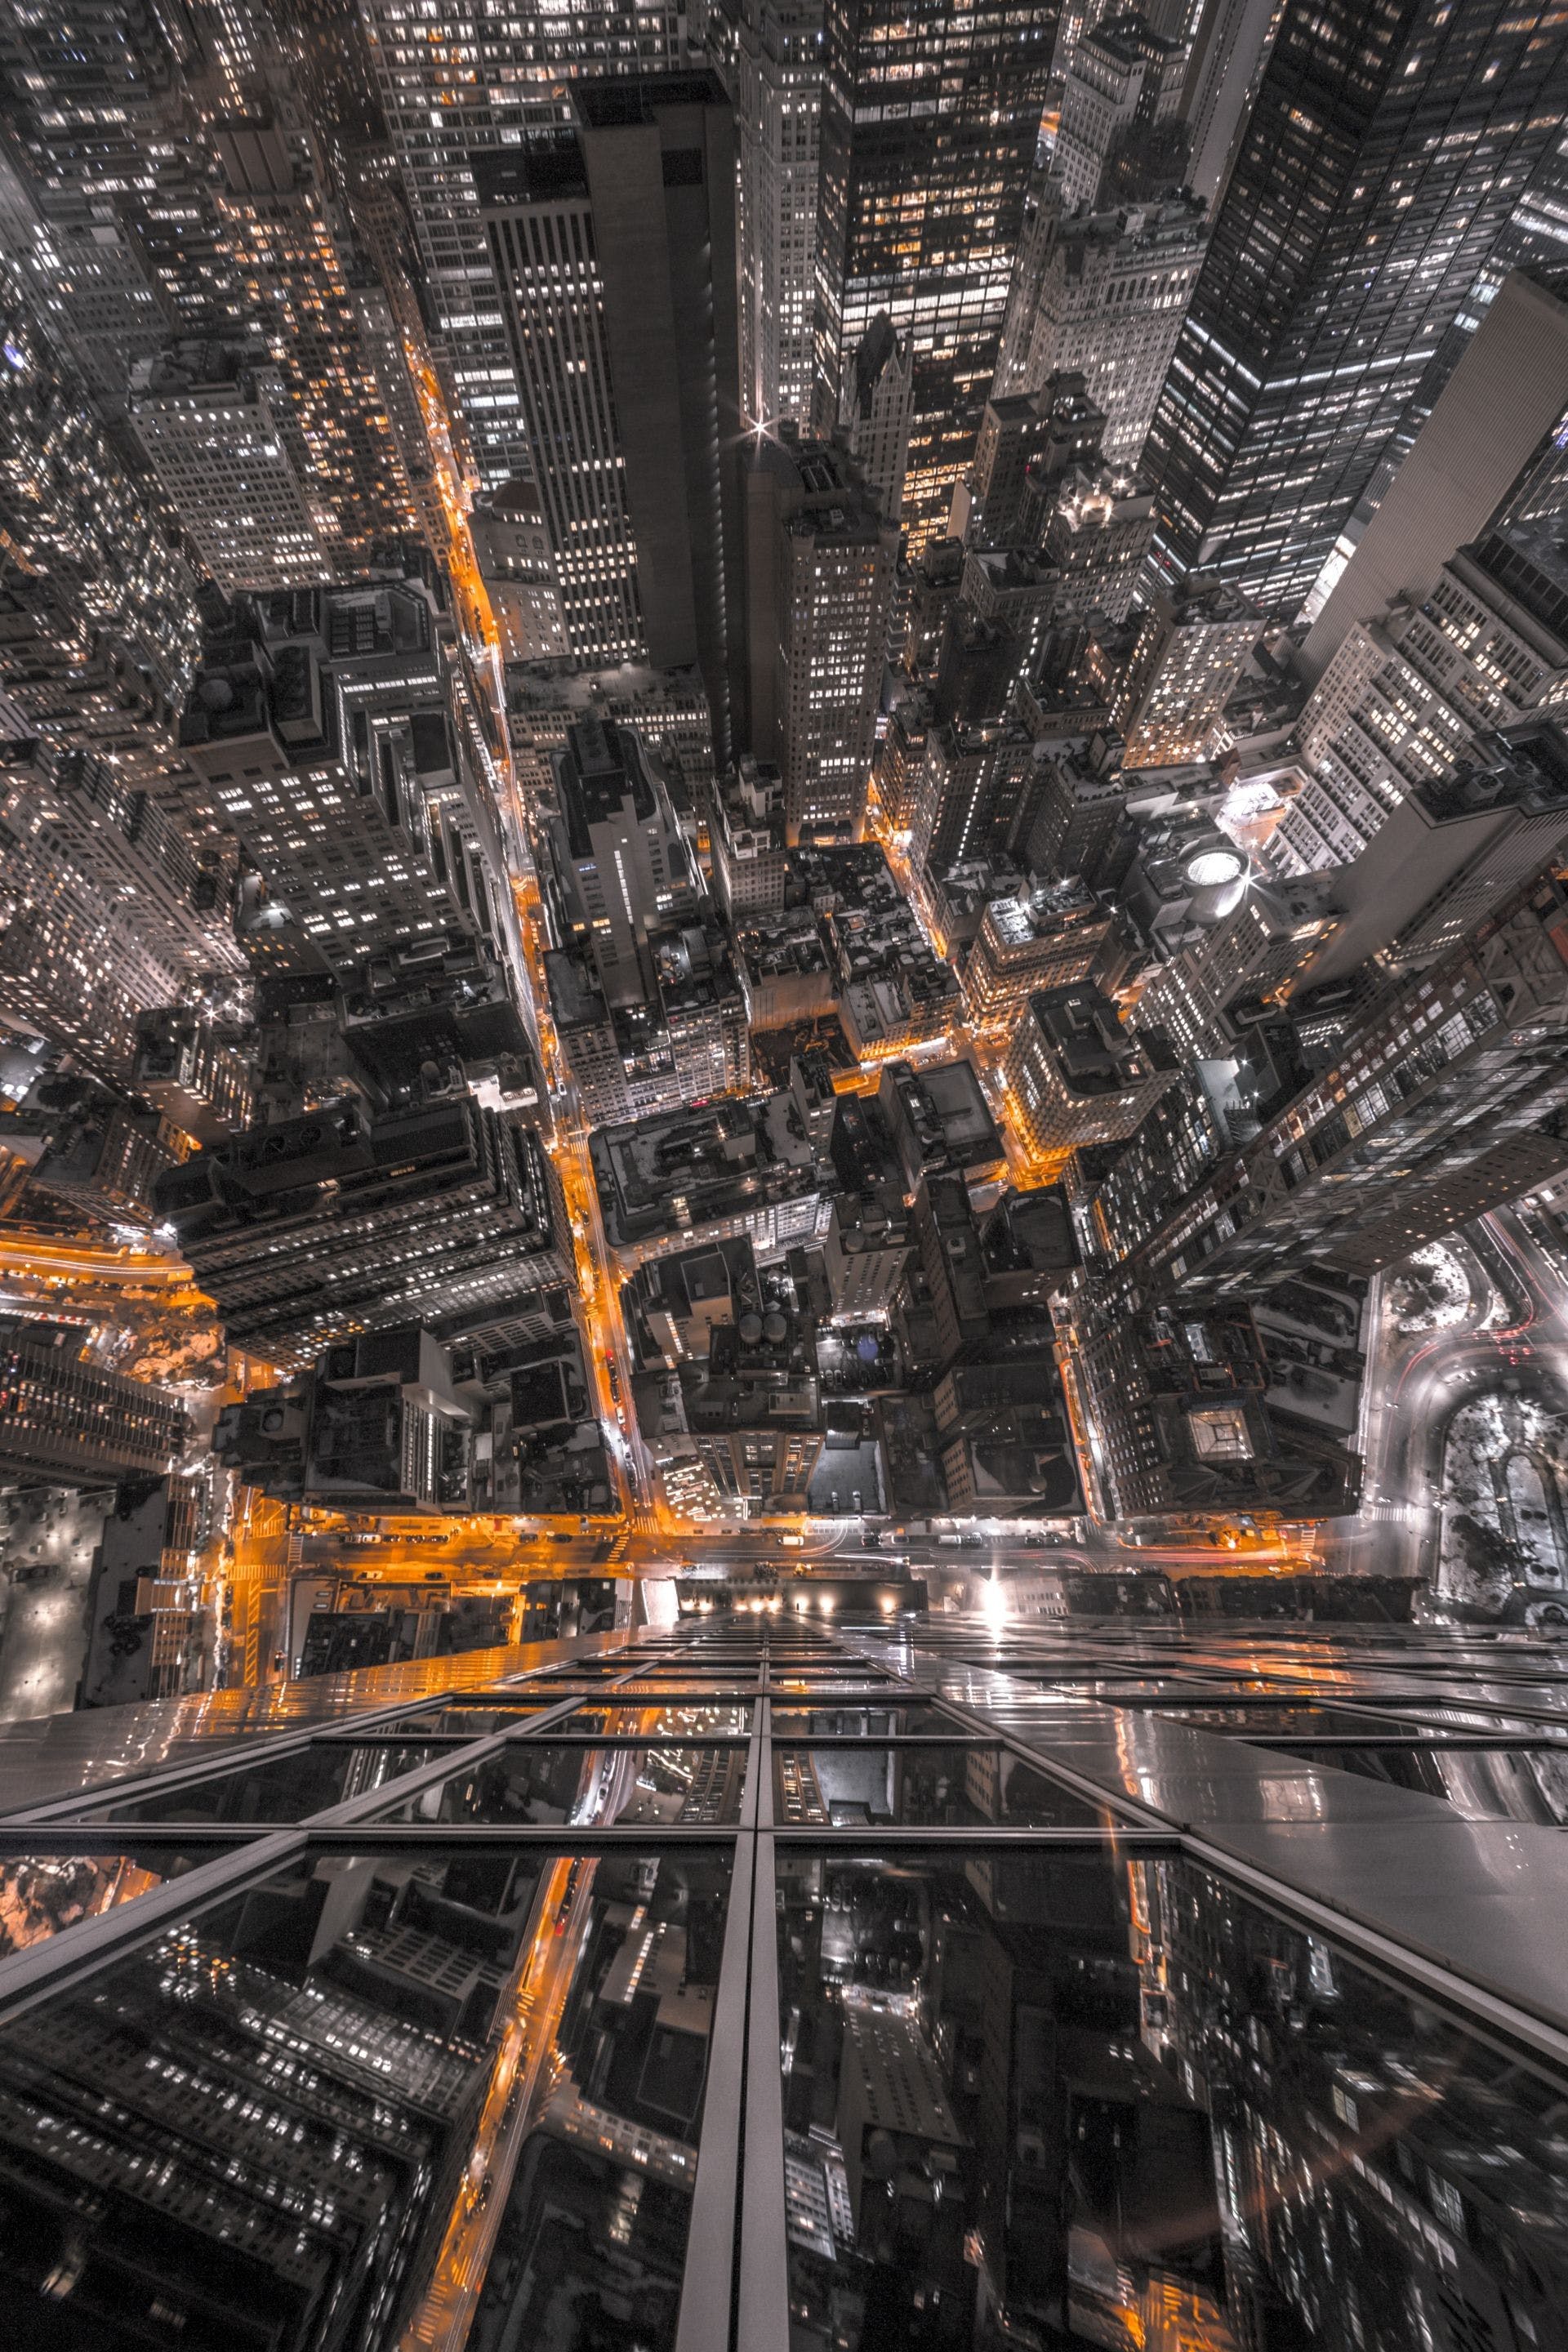 Cityscape Aerial View Wallpapers